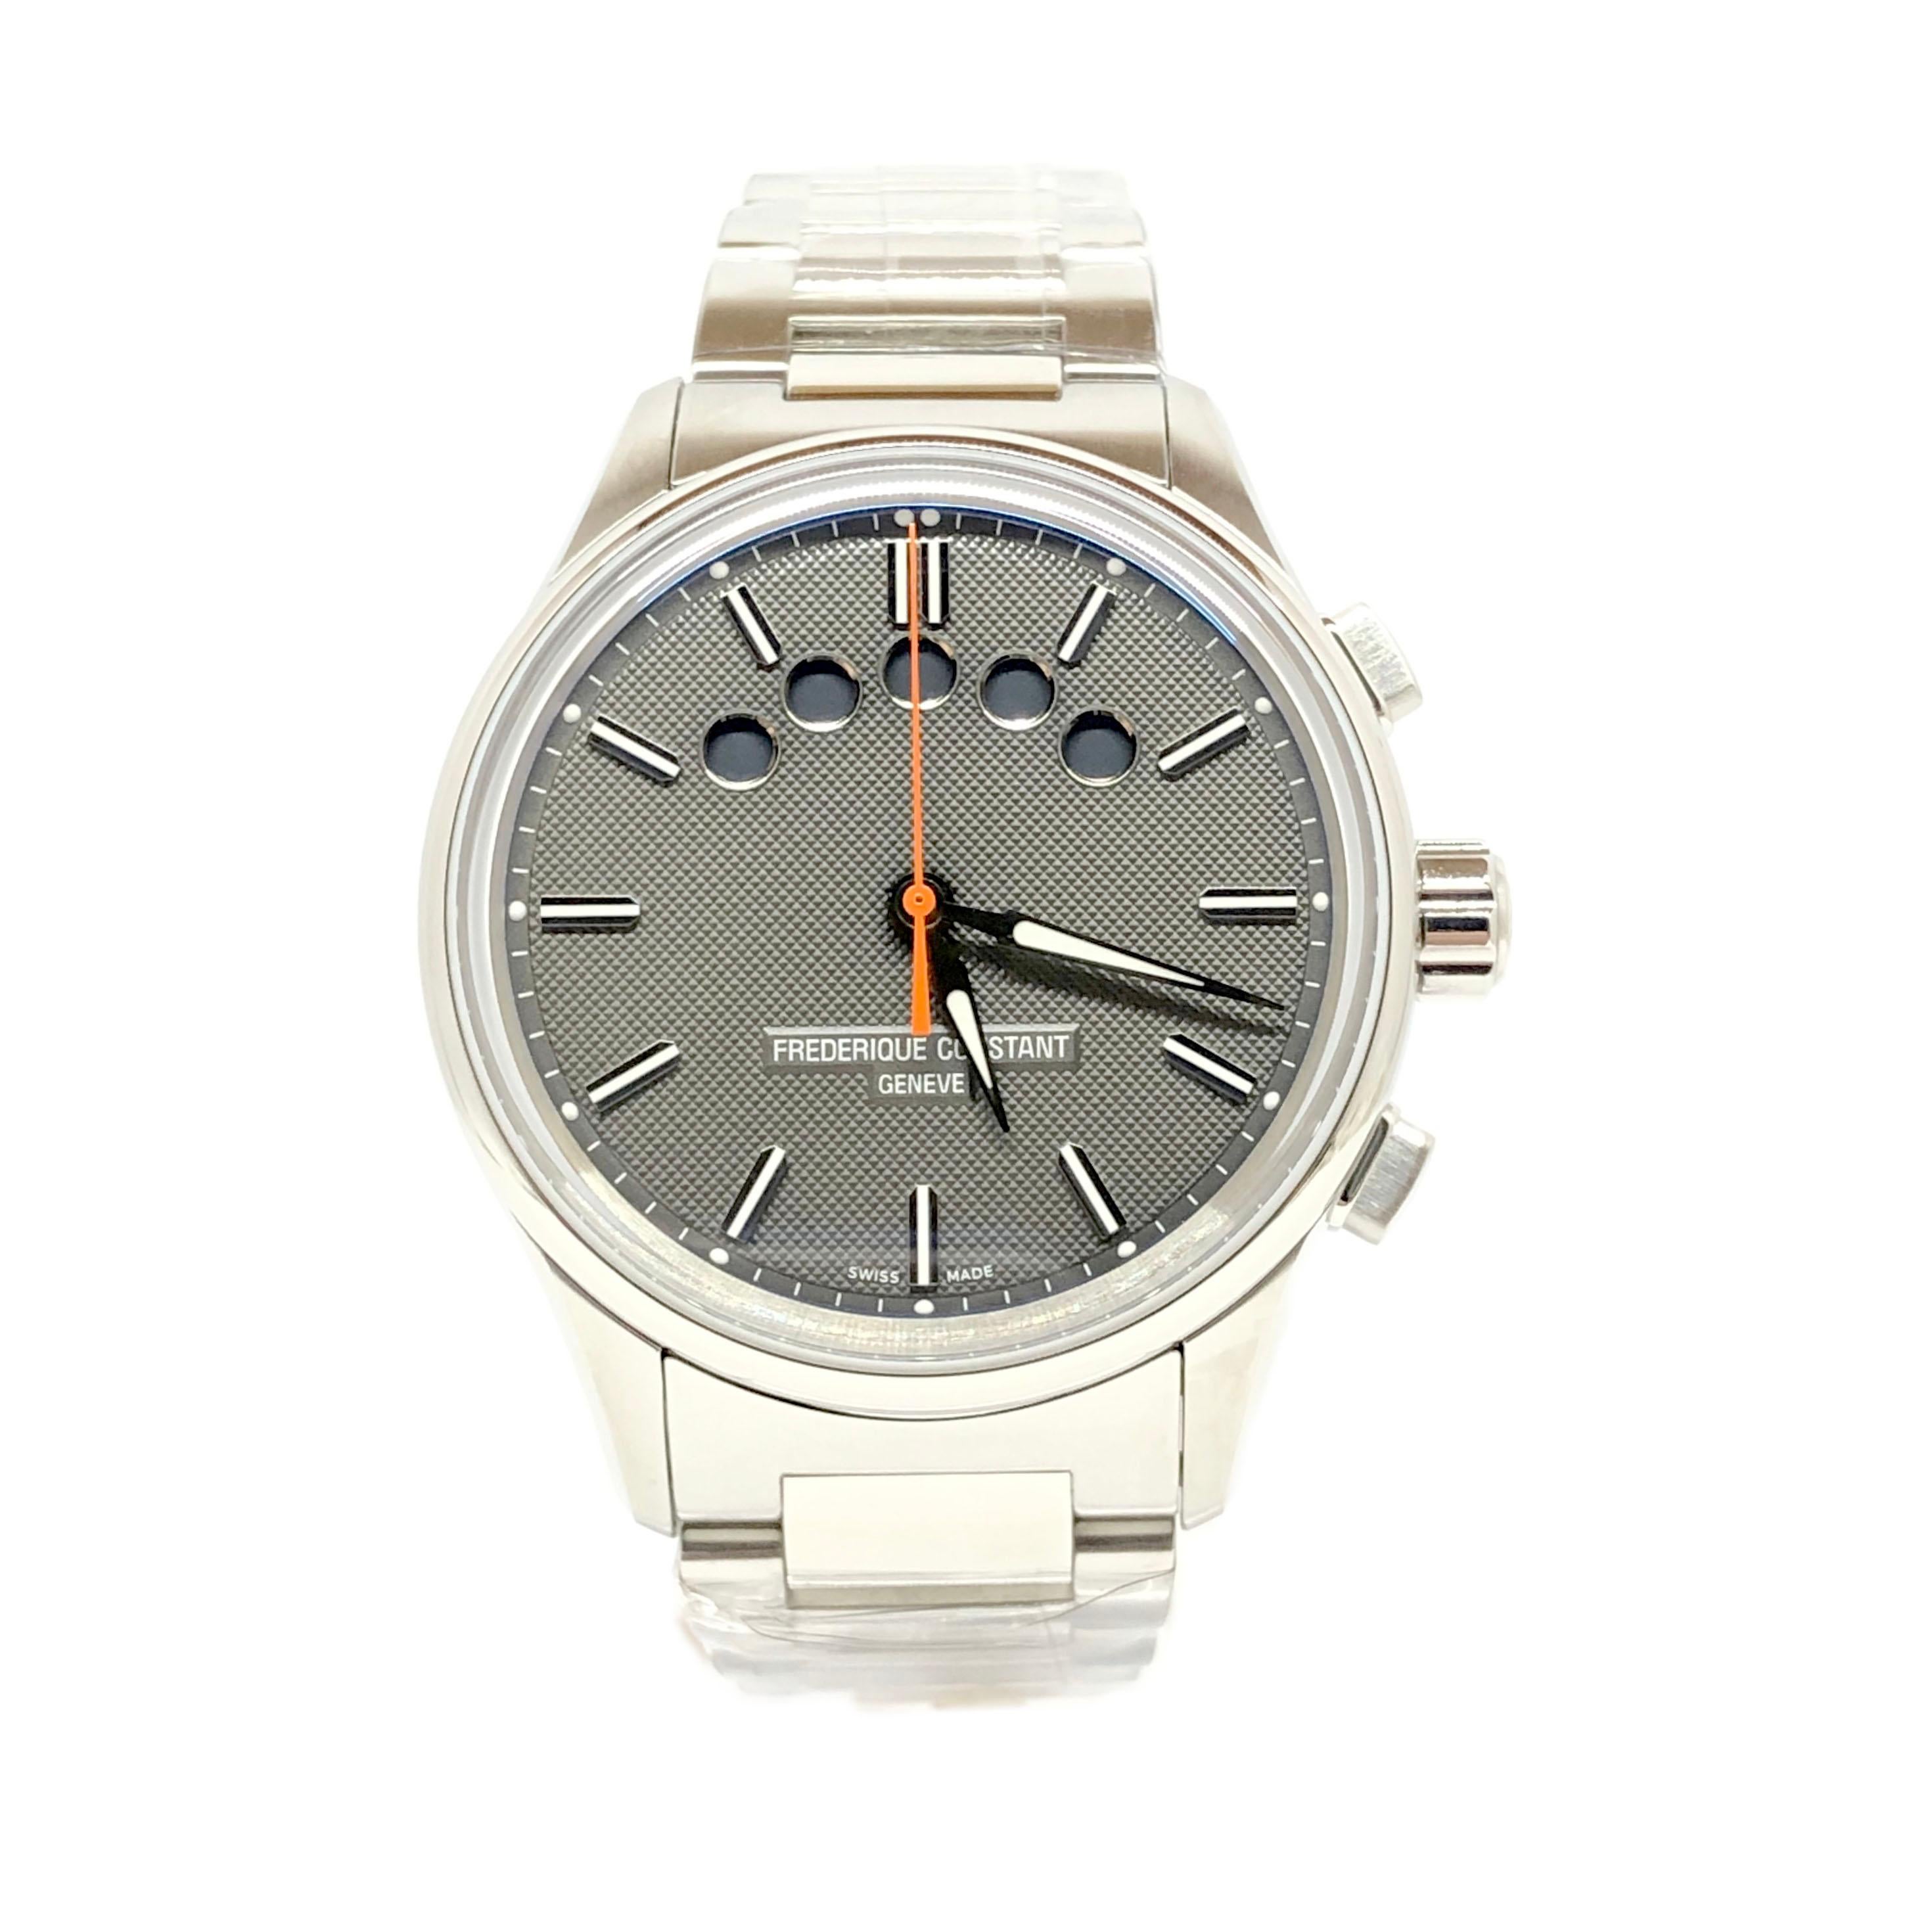 This Men’s watch has a 42 mm round silver-tone stainless steel case with fixed bezel. Gray dial with silver-tone hours and minutes hands, orange seconds hand & index hour markers.10 minutes regatta countdown at the top section of the dial.